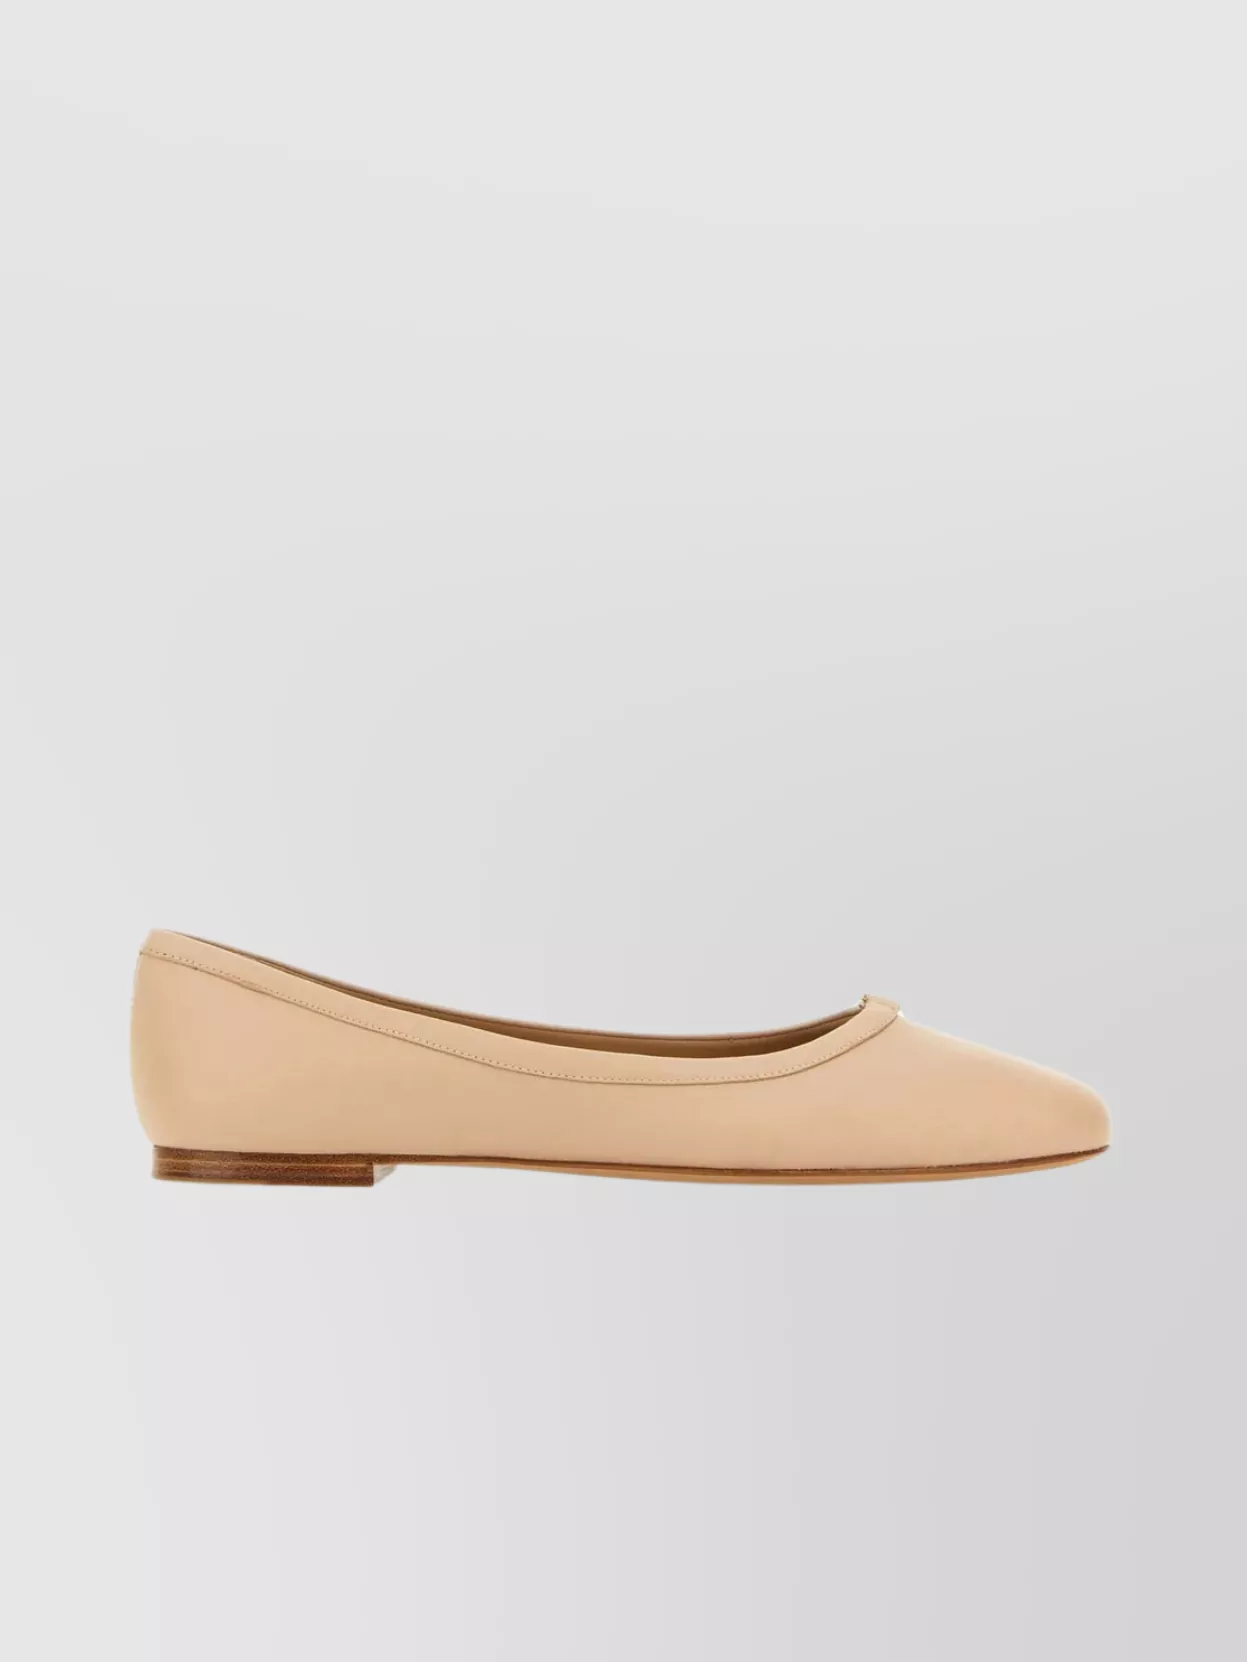 Chloé Round Toe Leather Ballet Flats